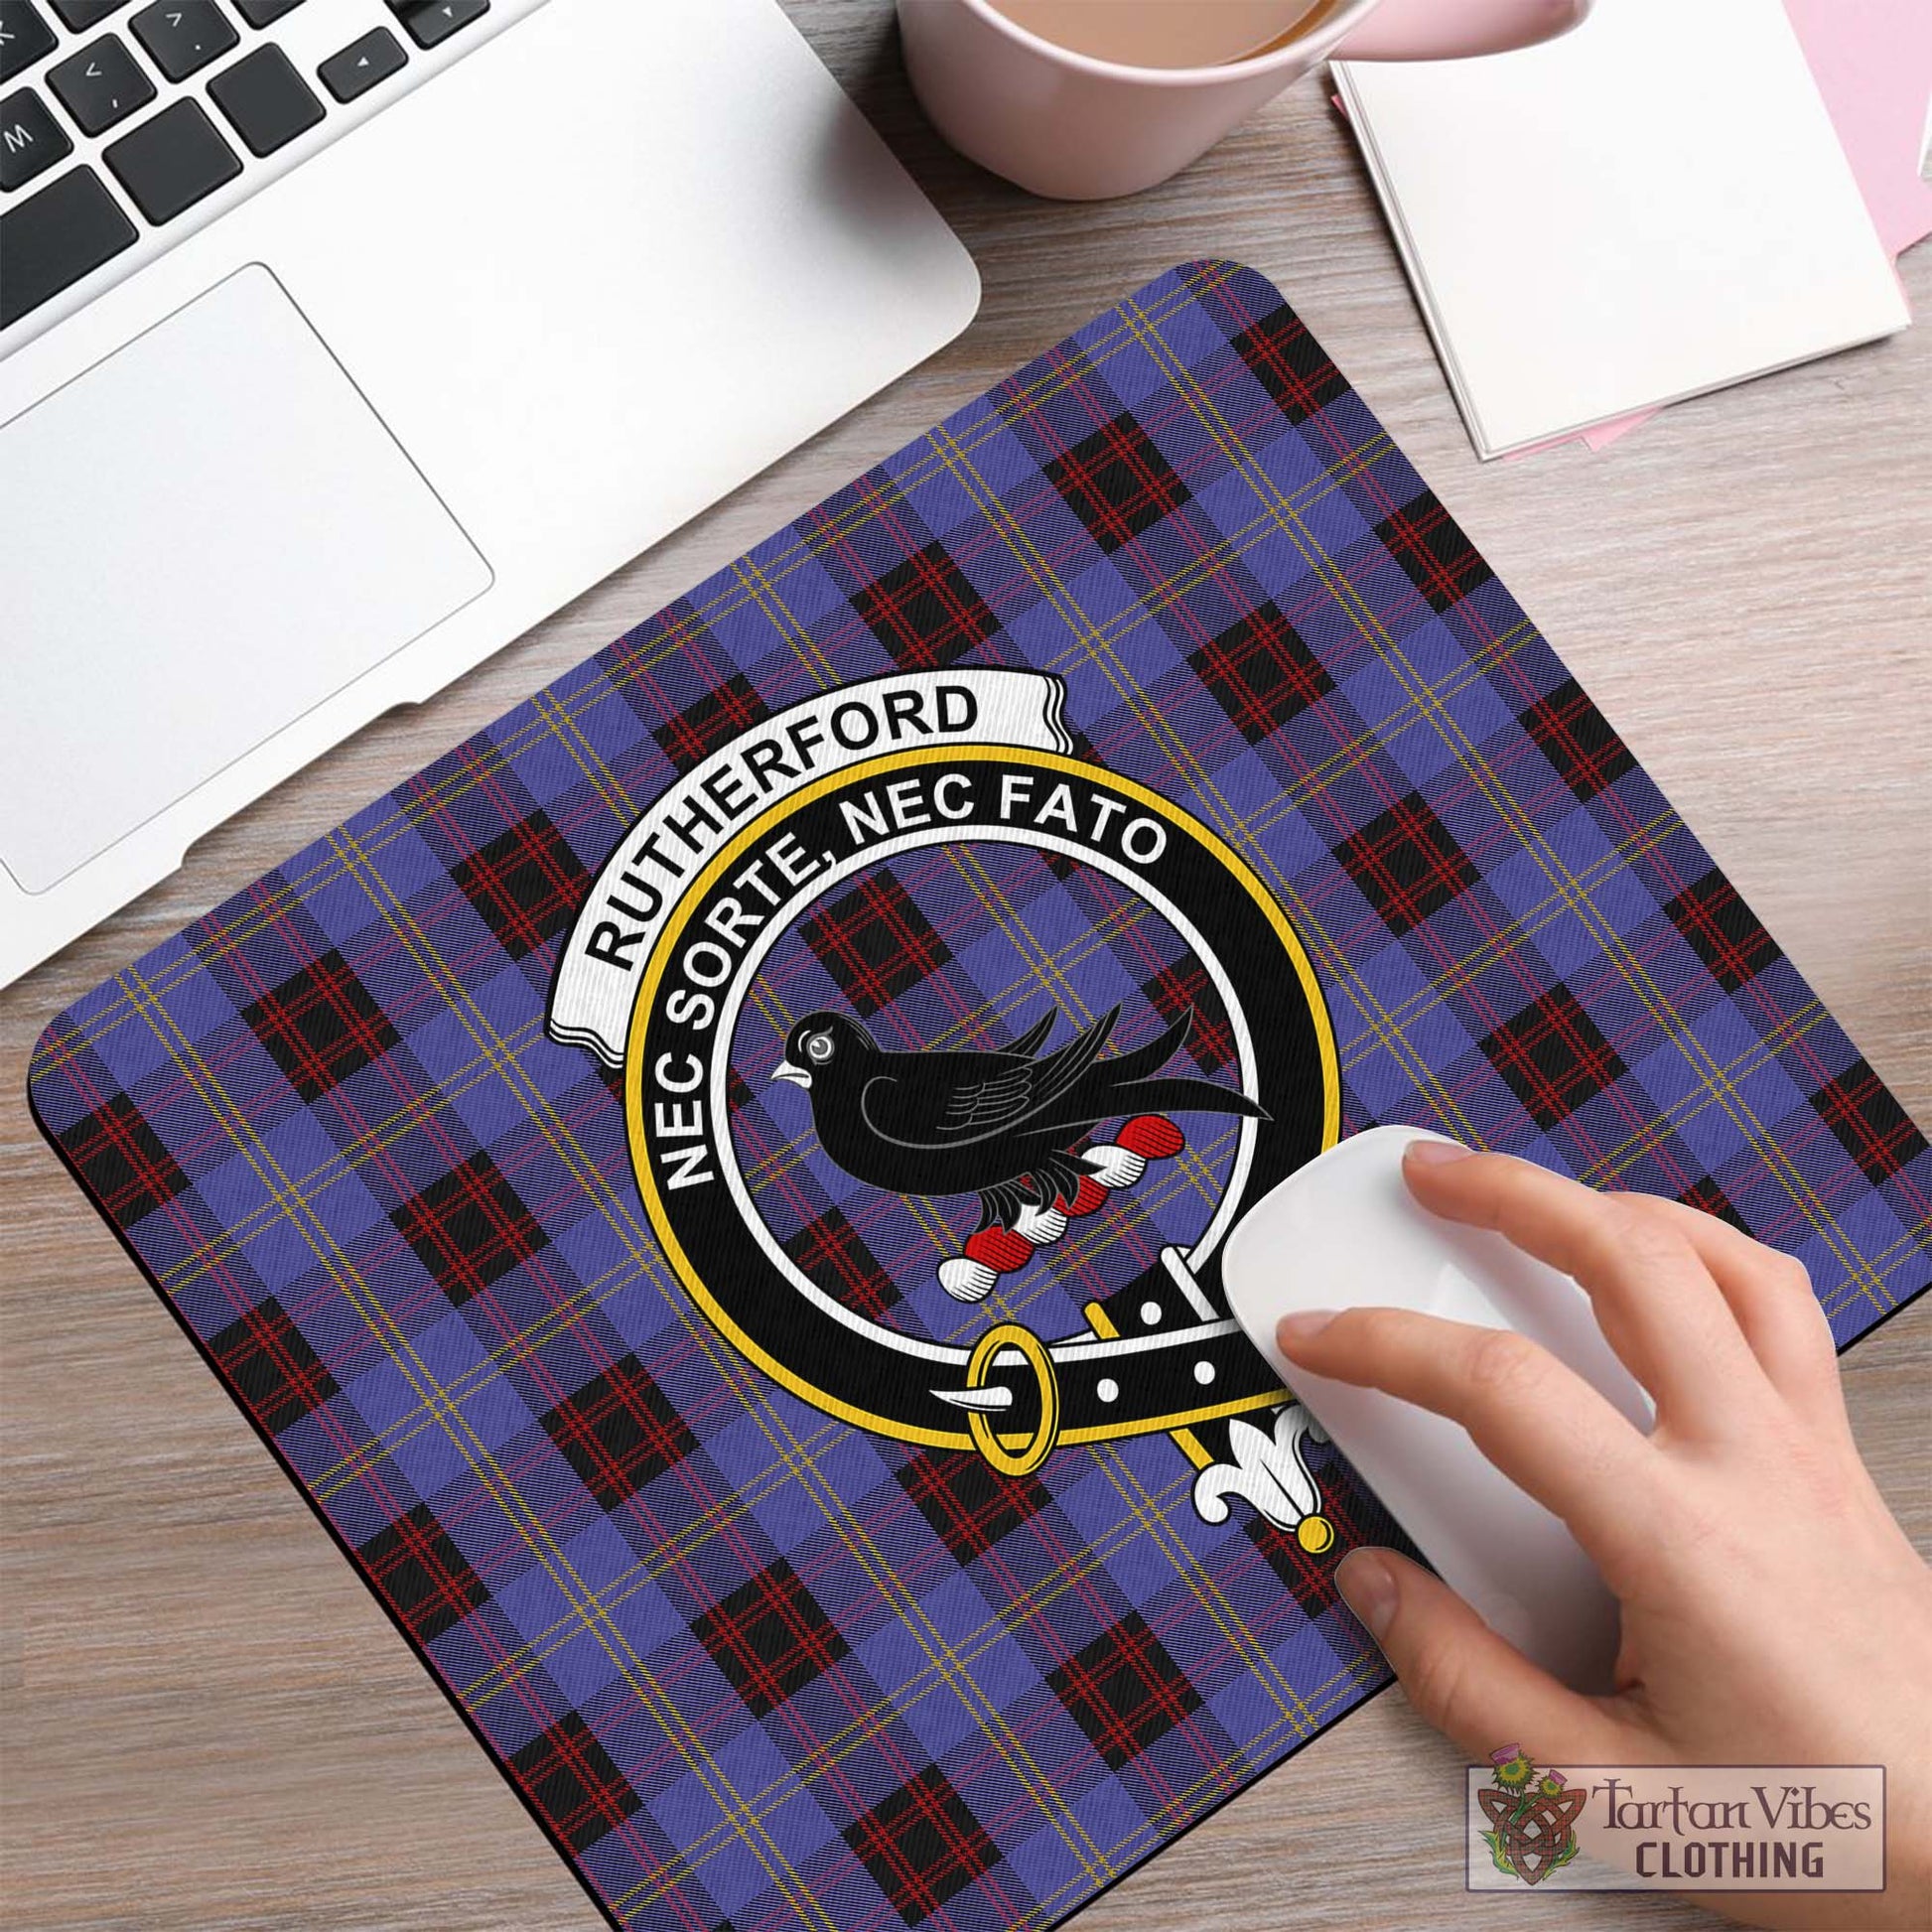 Tartan Vibes Clothing Rutherford Tartan Mouse Pad with Family Crest